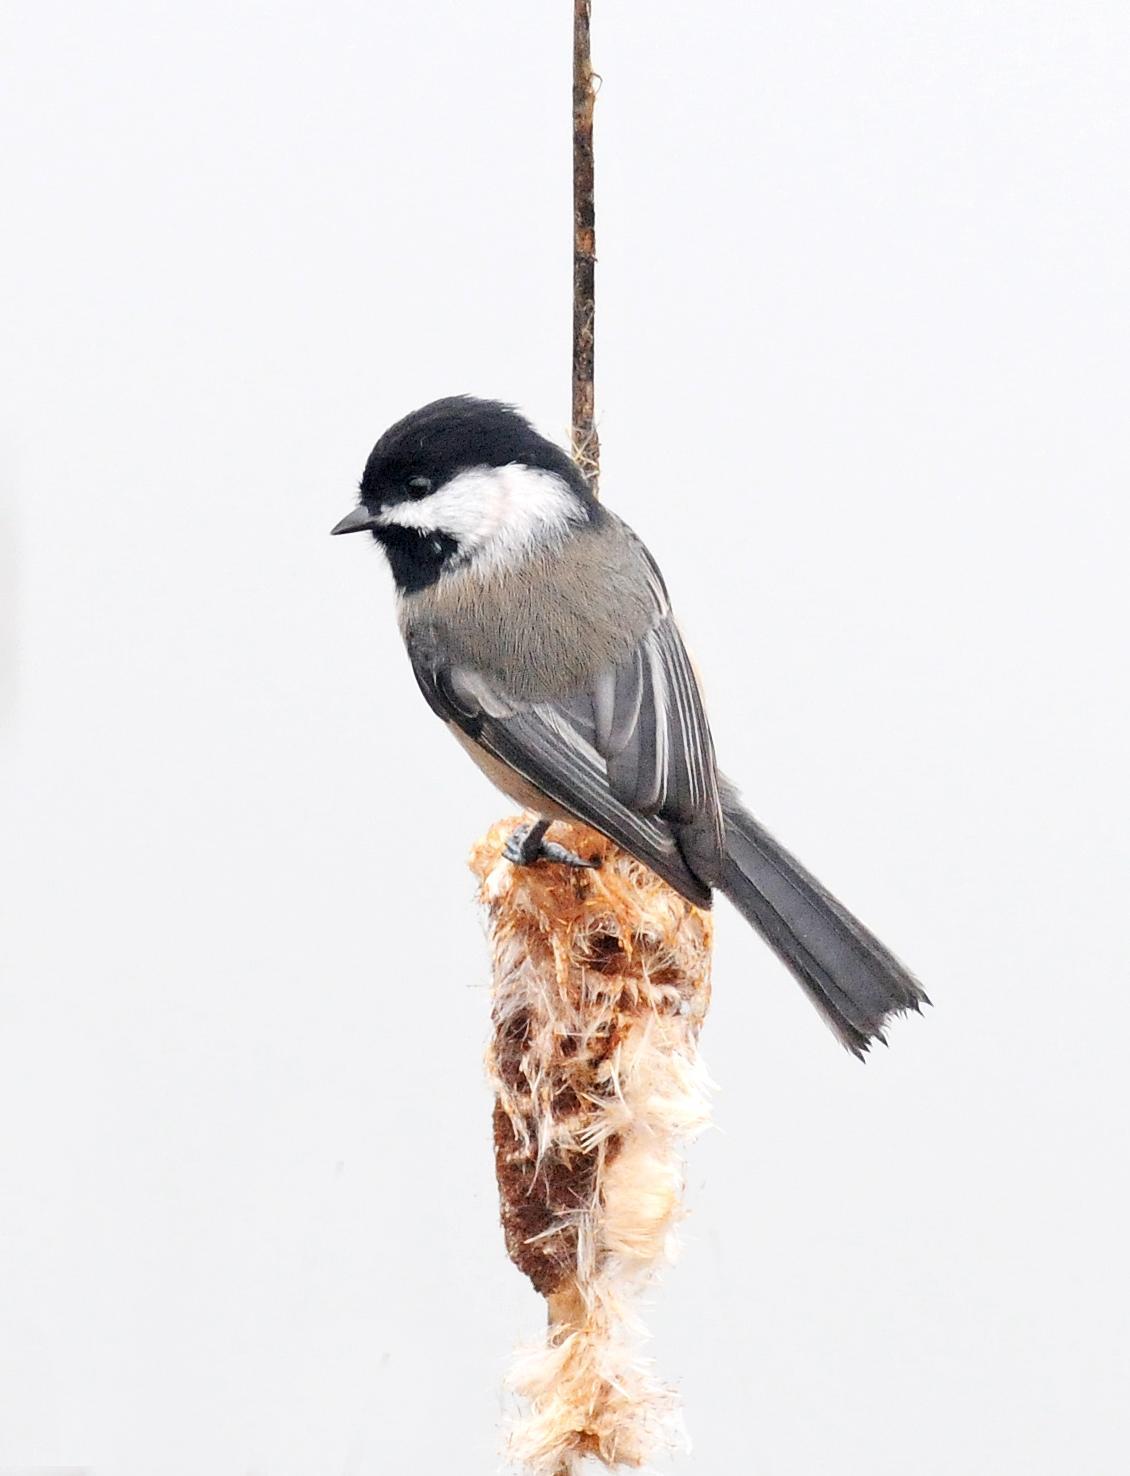 Black-capped Chickadee Photo by Steven Mlodinow